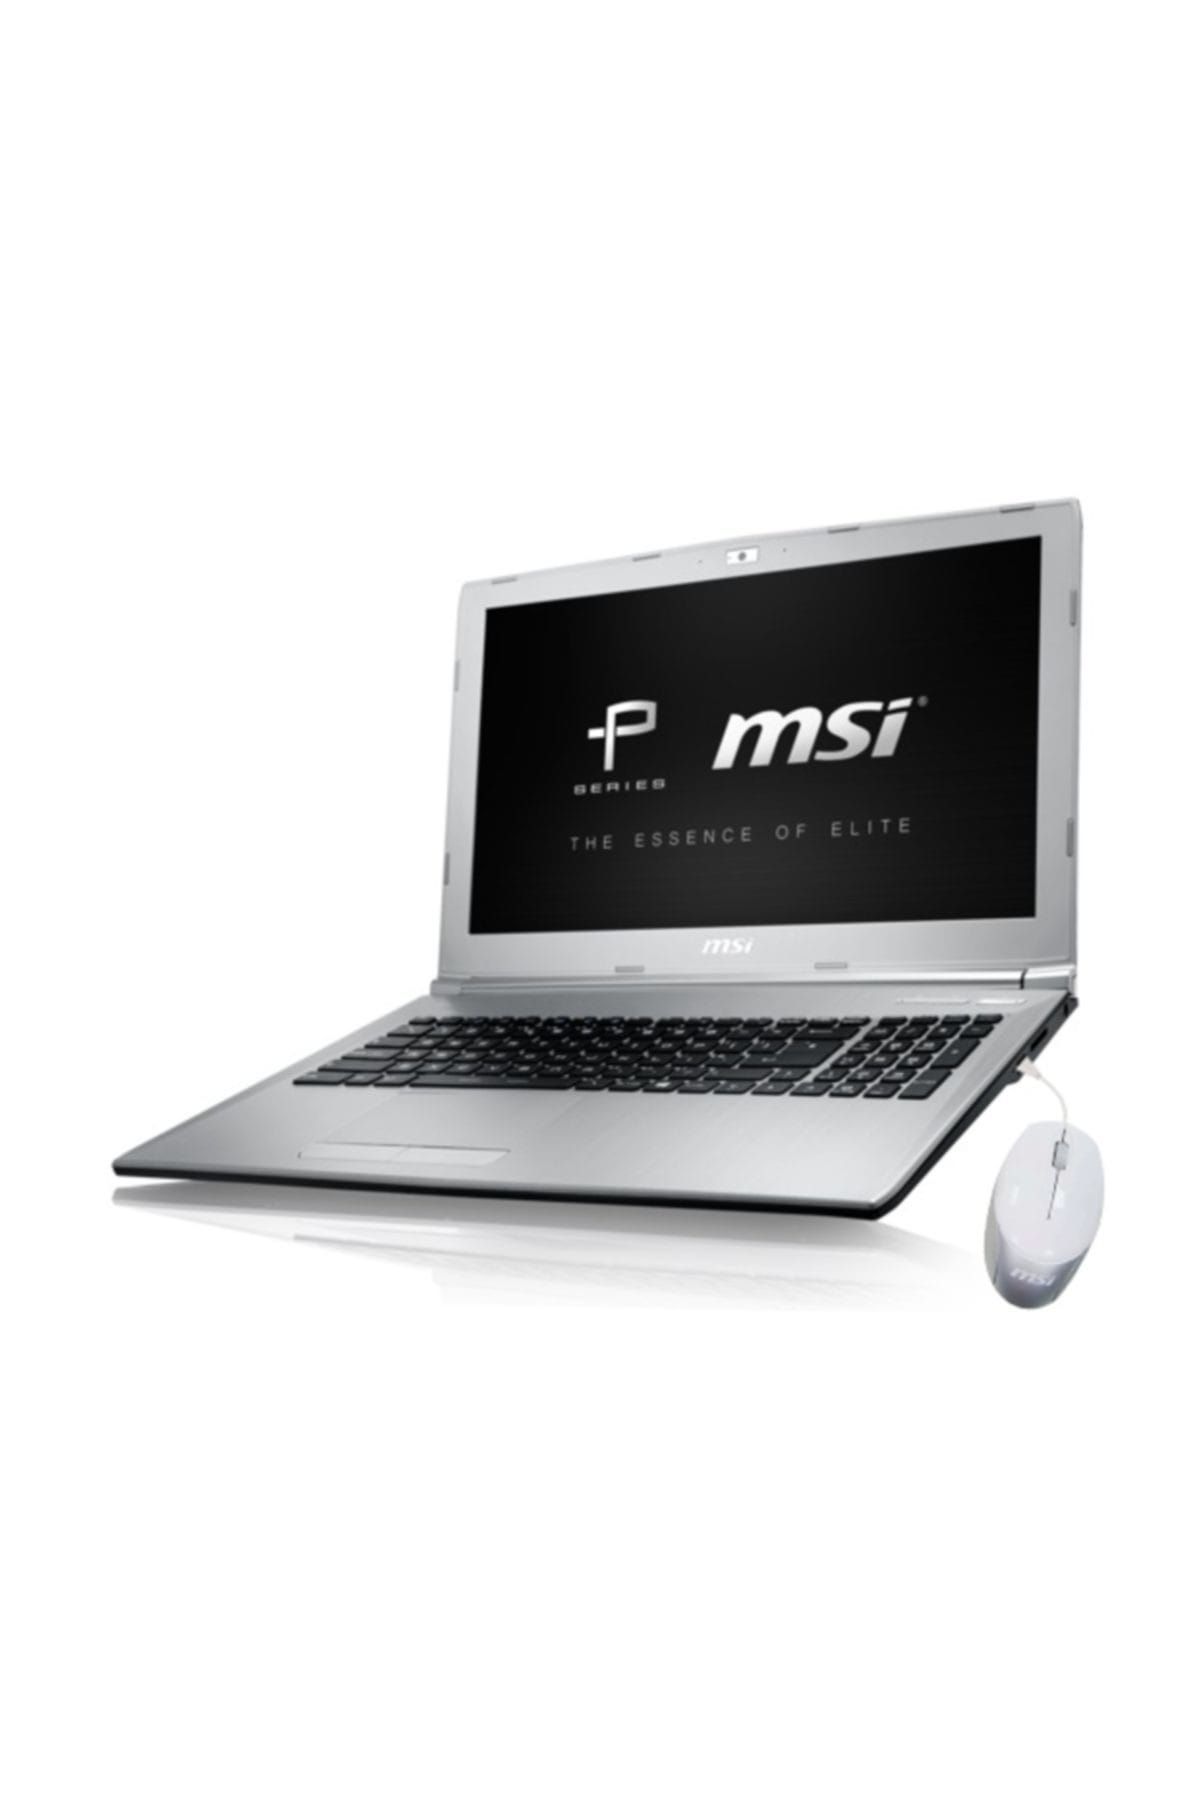 MSI NB PL62 7RC-276XTR I5-7300HQ 4GB DDR4 MX150 GDDR5 2GB 1TB 15.6 FHD DOS + MOUSE